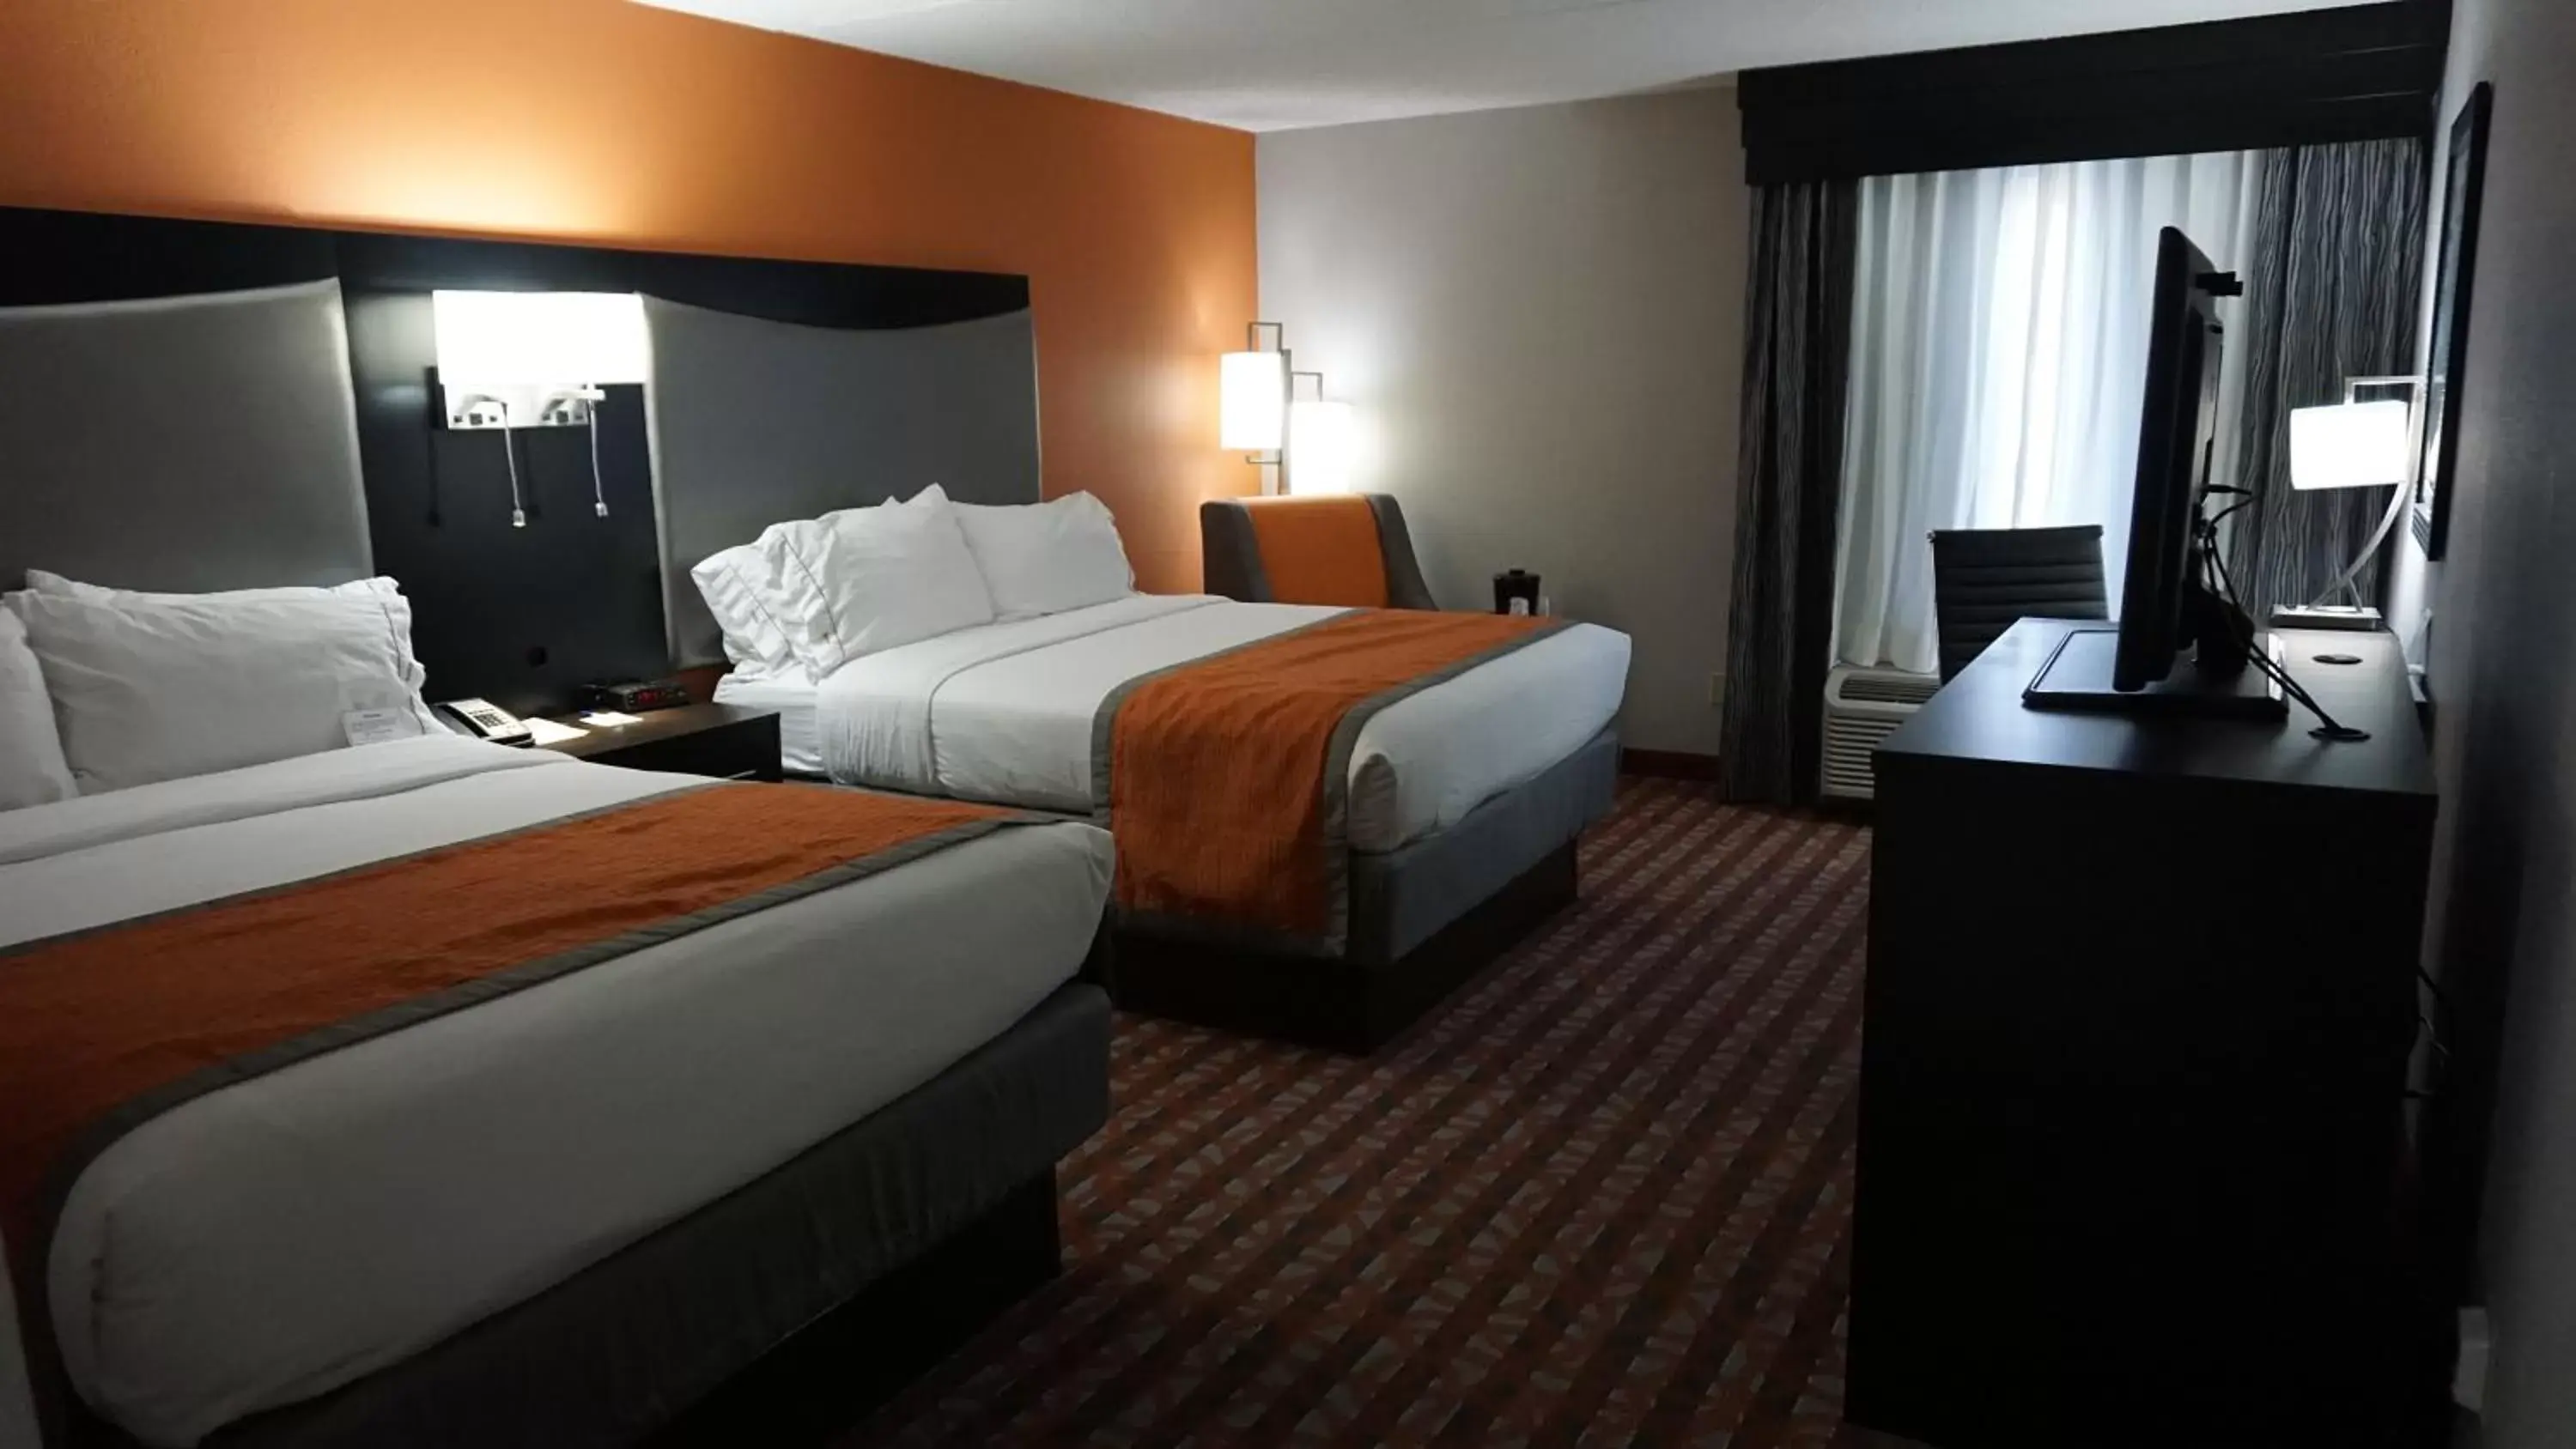 Bed, Room Photo in Holiday Inn Express & Suites Nashville Southeast - Antioch, an IHG Hotel